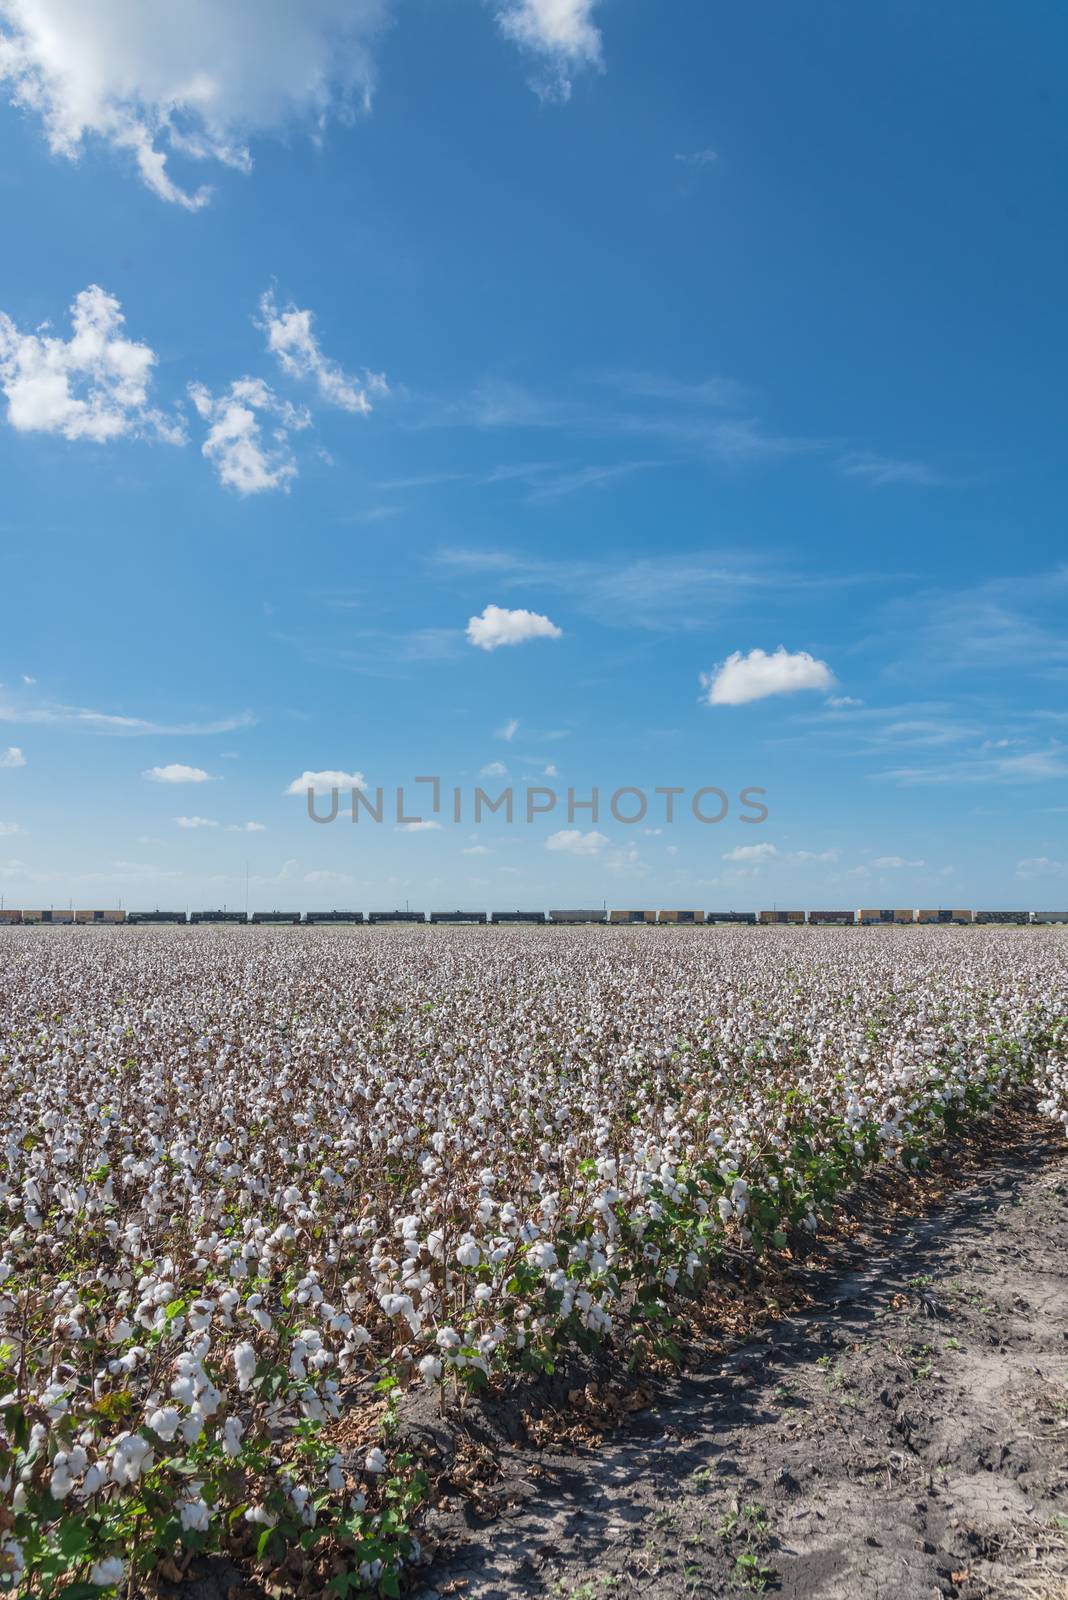 Cotton farm in harvest season and freight train in Corpus Christi, Texas, USA by trongnguyen